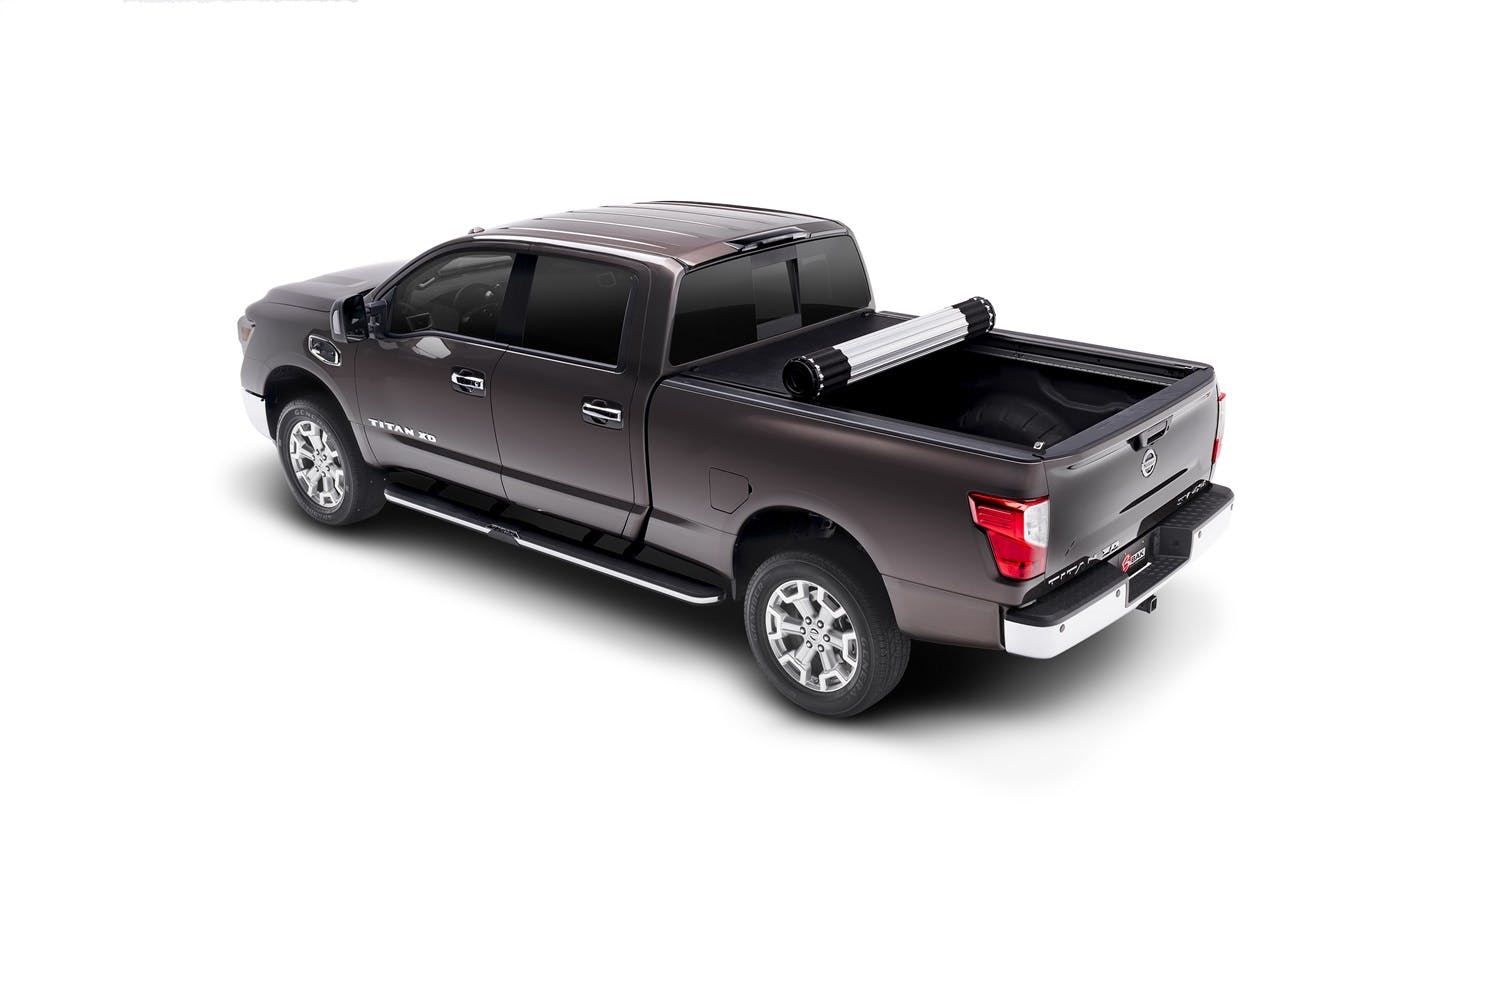 BAK Industries 39525 Revolver X2 Hard Rolling Truck Bed Cover